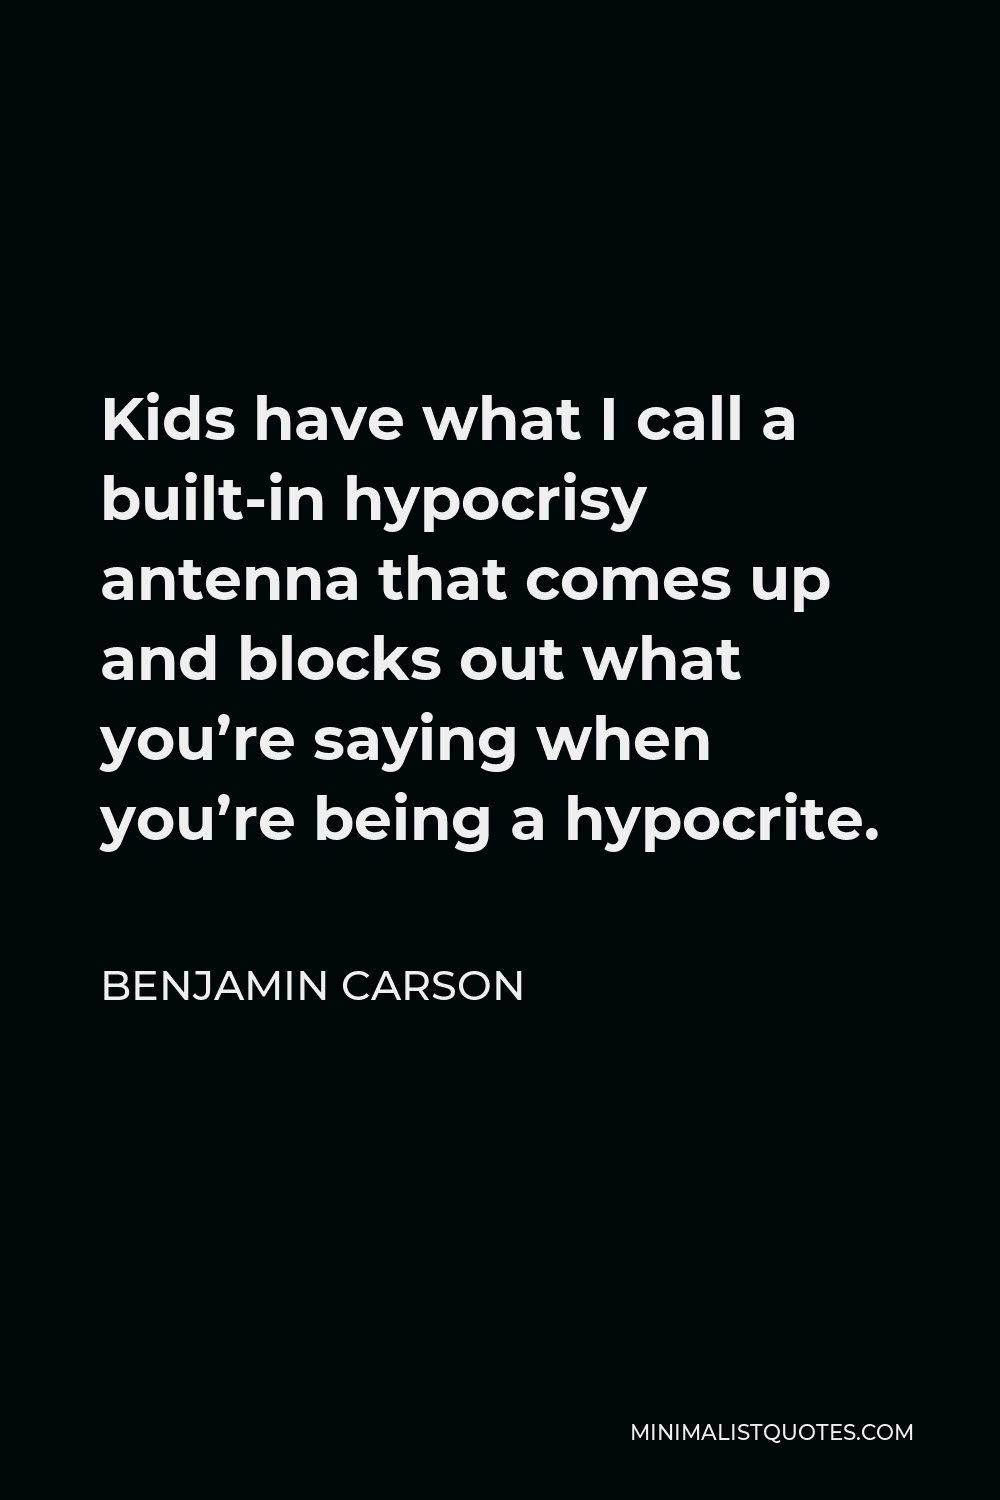 Benjamin Carson Quote - Kids have what I call a built-in hypocrisy antenna that comes up and blocks out what you’re saying when you’re being a hypocrite.